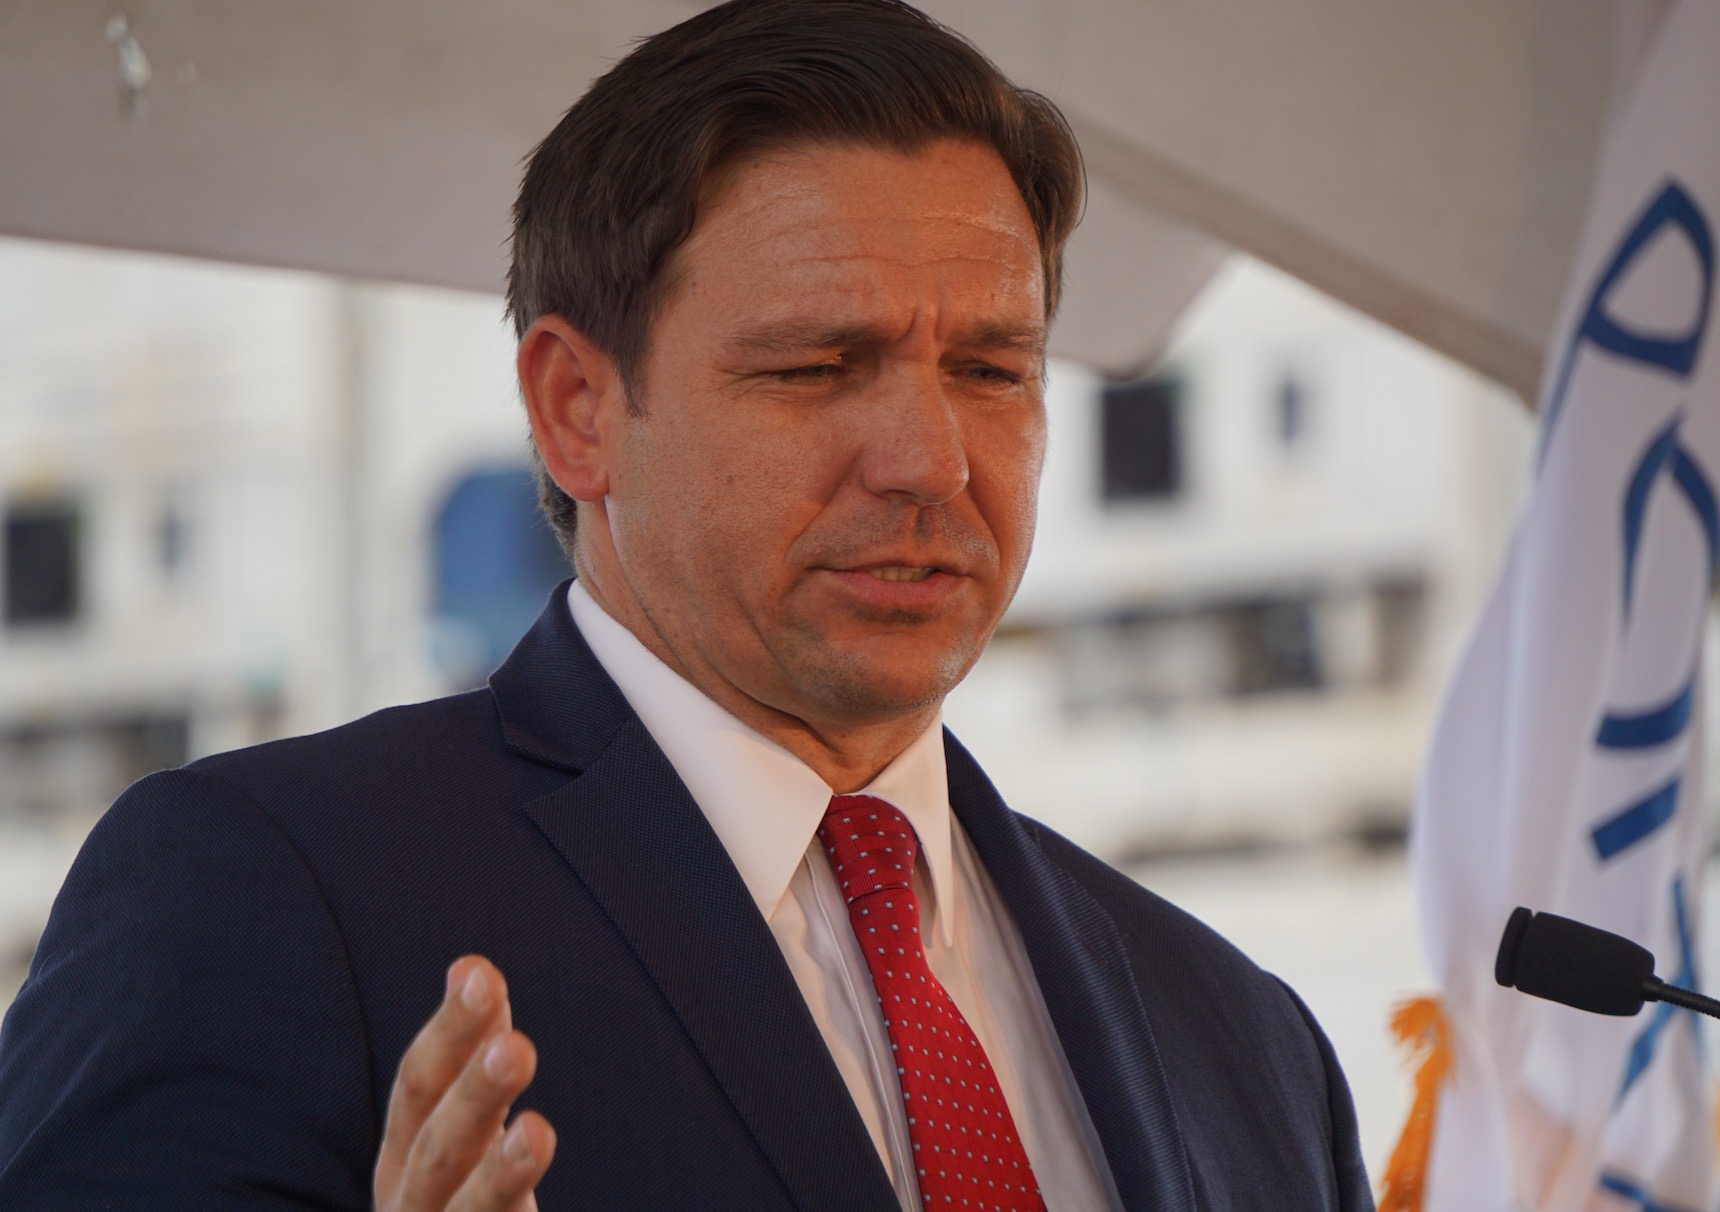 DeSantis pressured to suspend evictions and foreclosures during pandemic